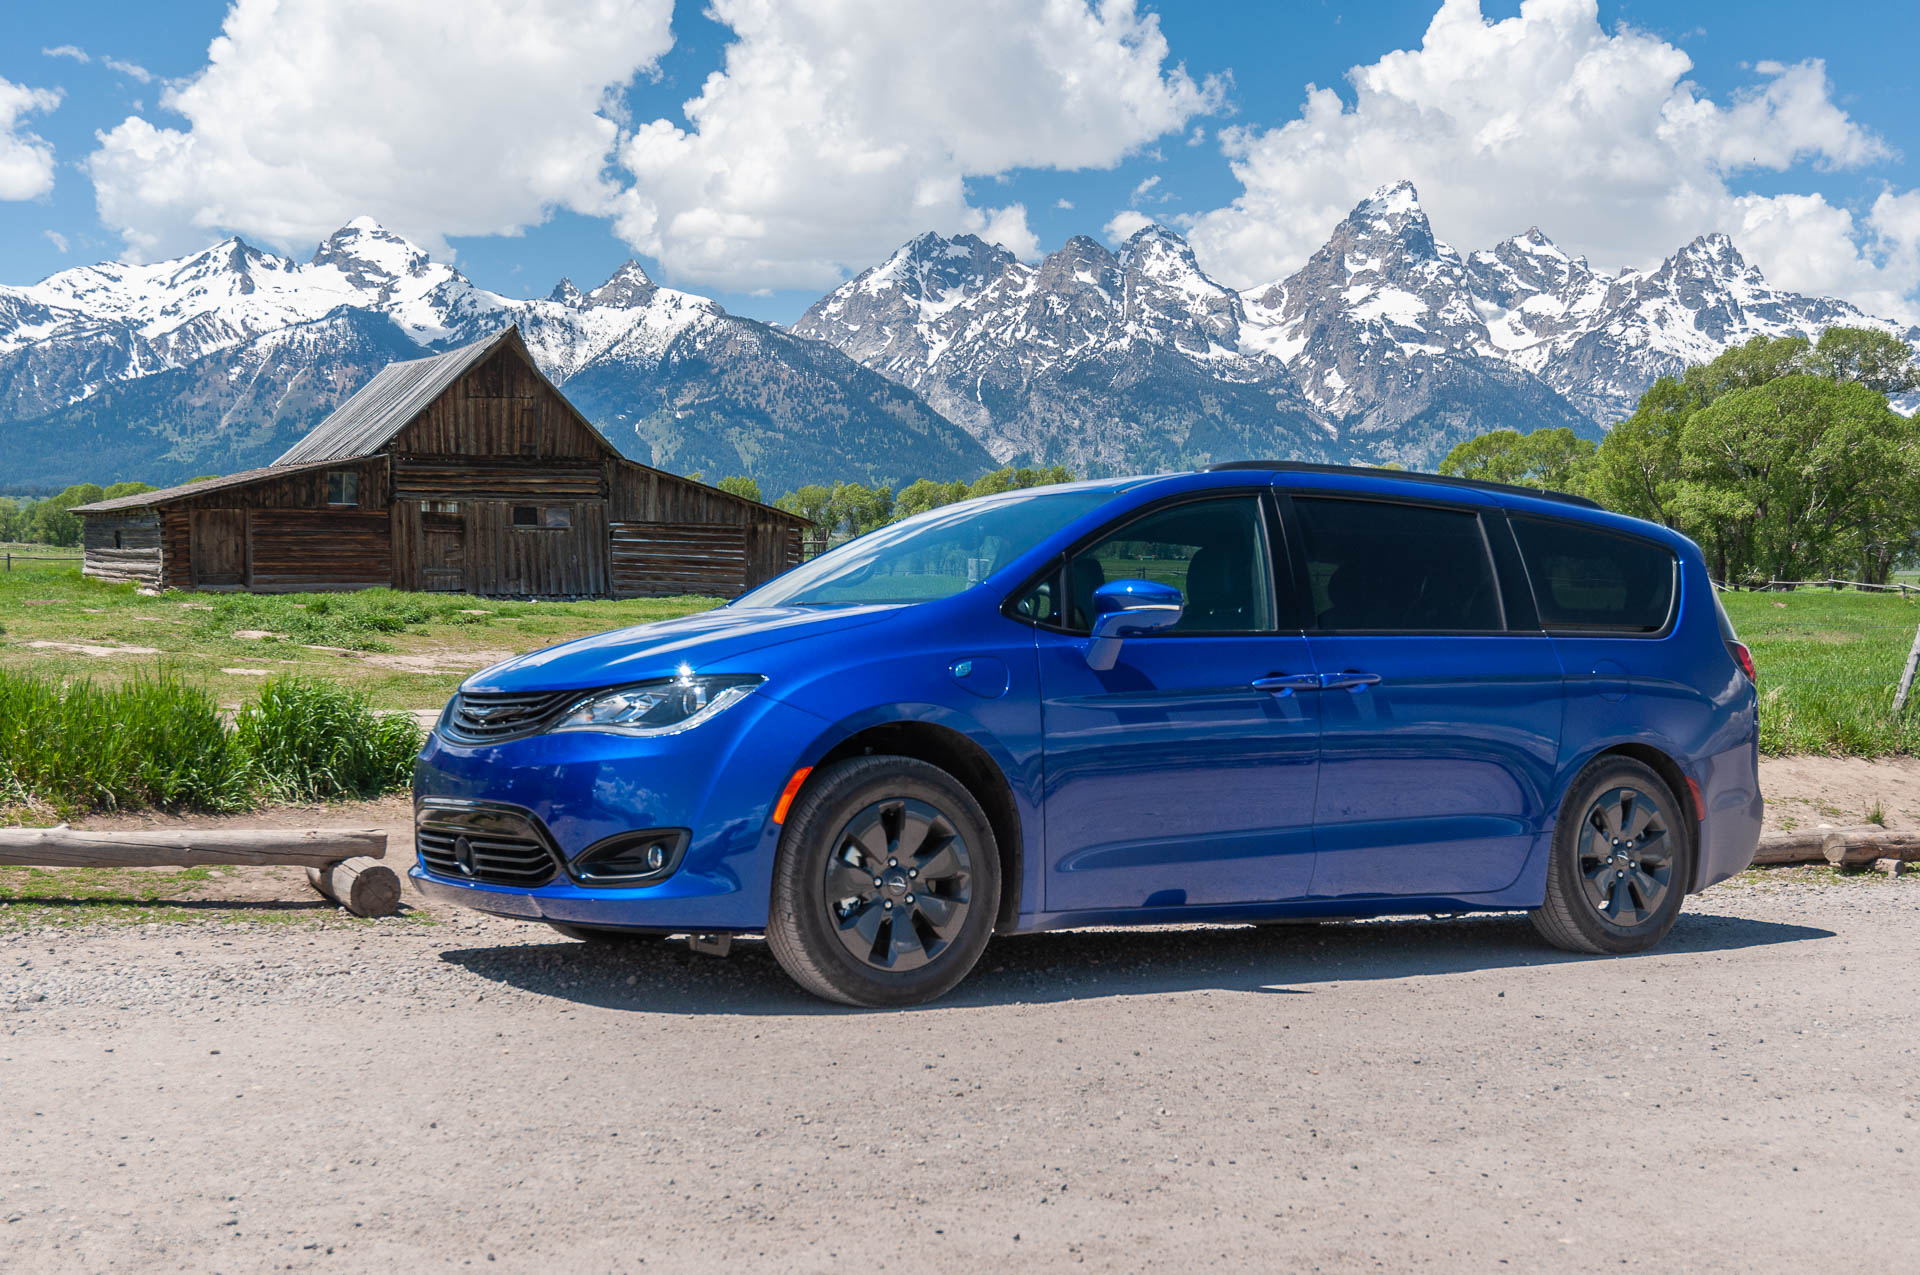 2019-chrysler-pacifica-hybrid-gas-mileage-review-the-ideal-family-hauler